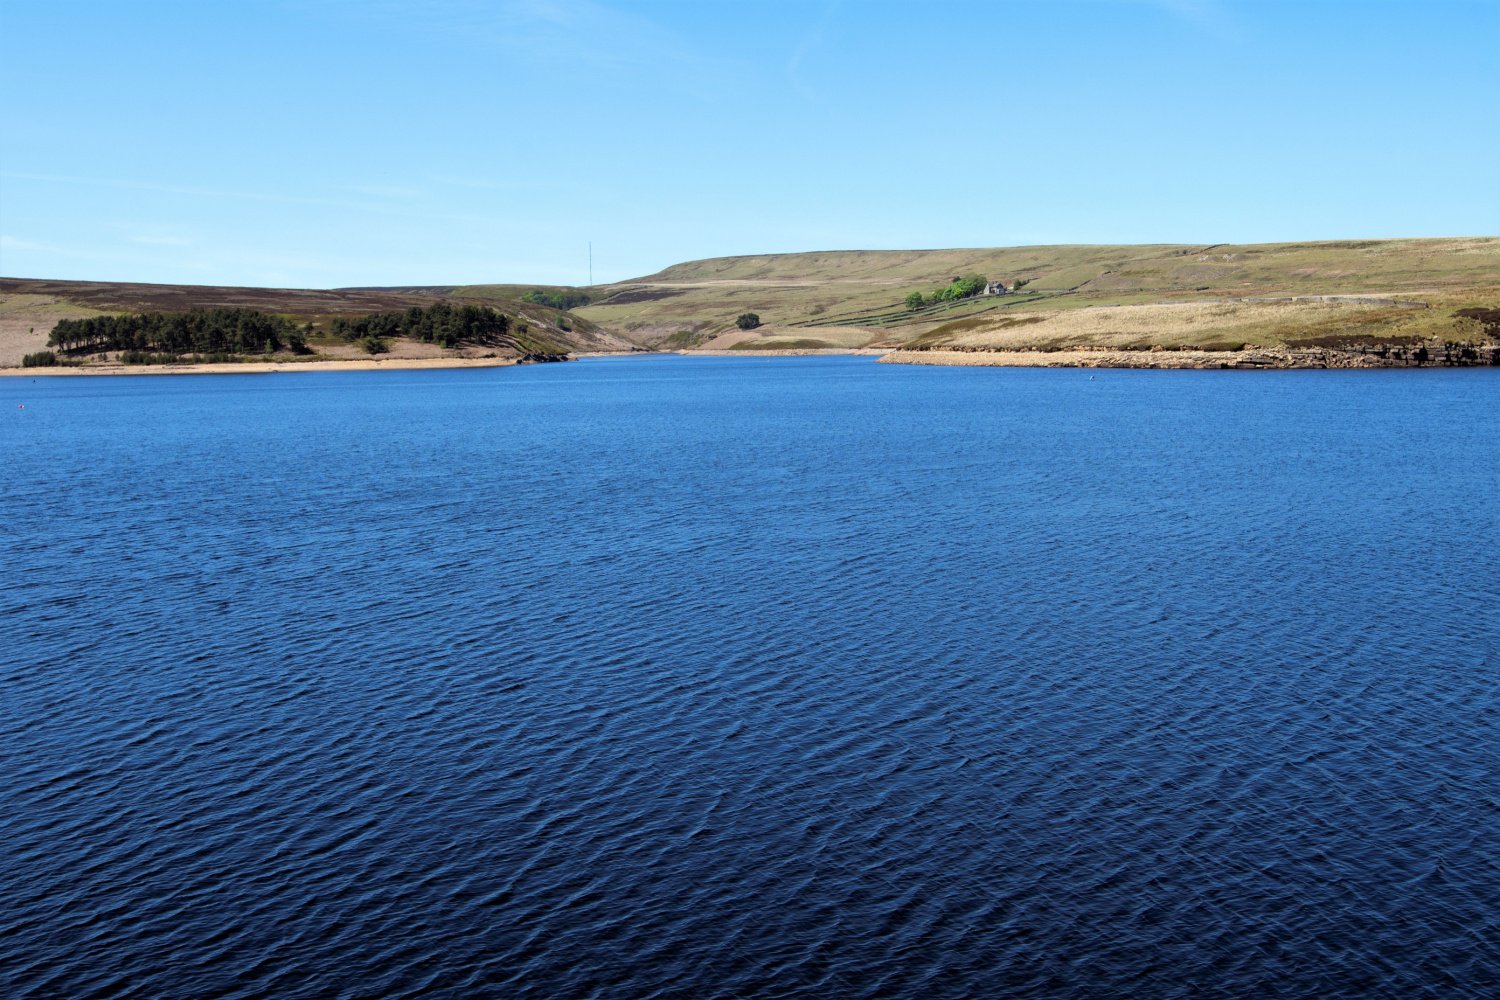 Image name winscar reservoir sheffield south yorkshire the 11 image from the post Walk: Winscar Reservoir in Yorkshire.com.